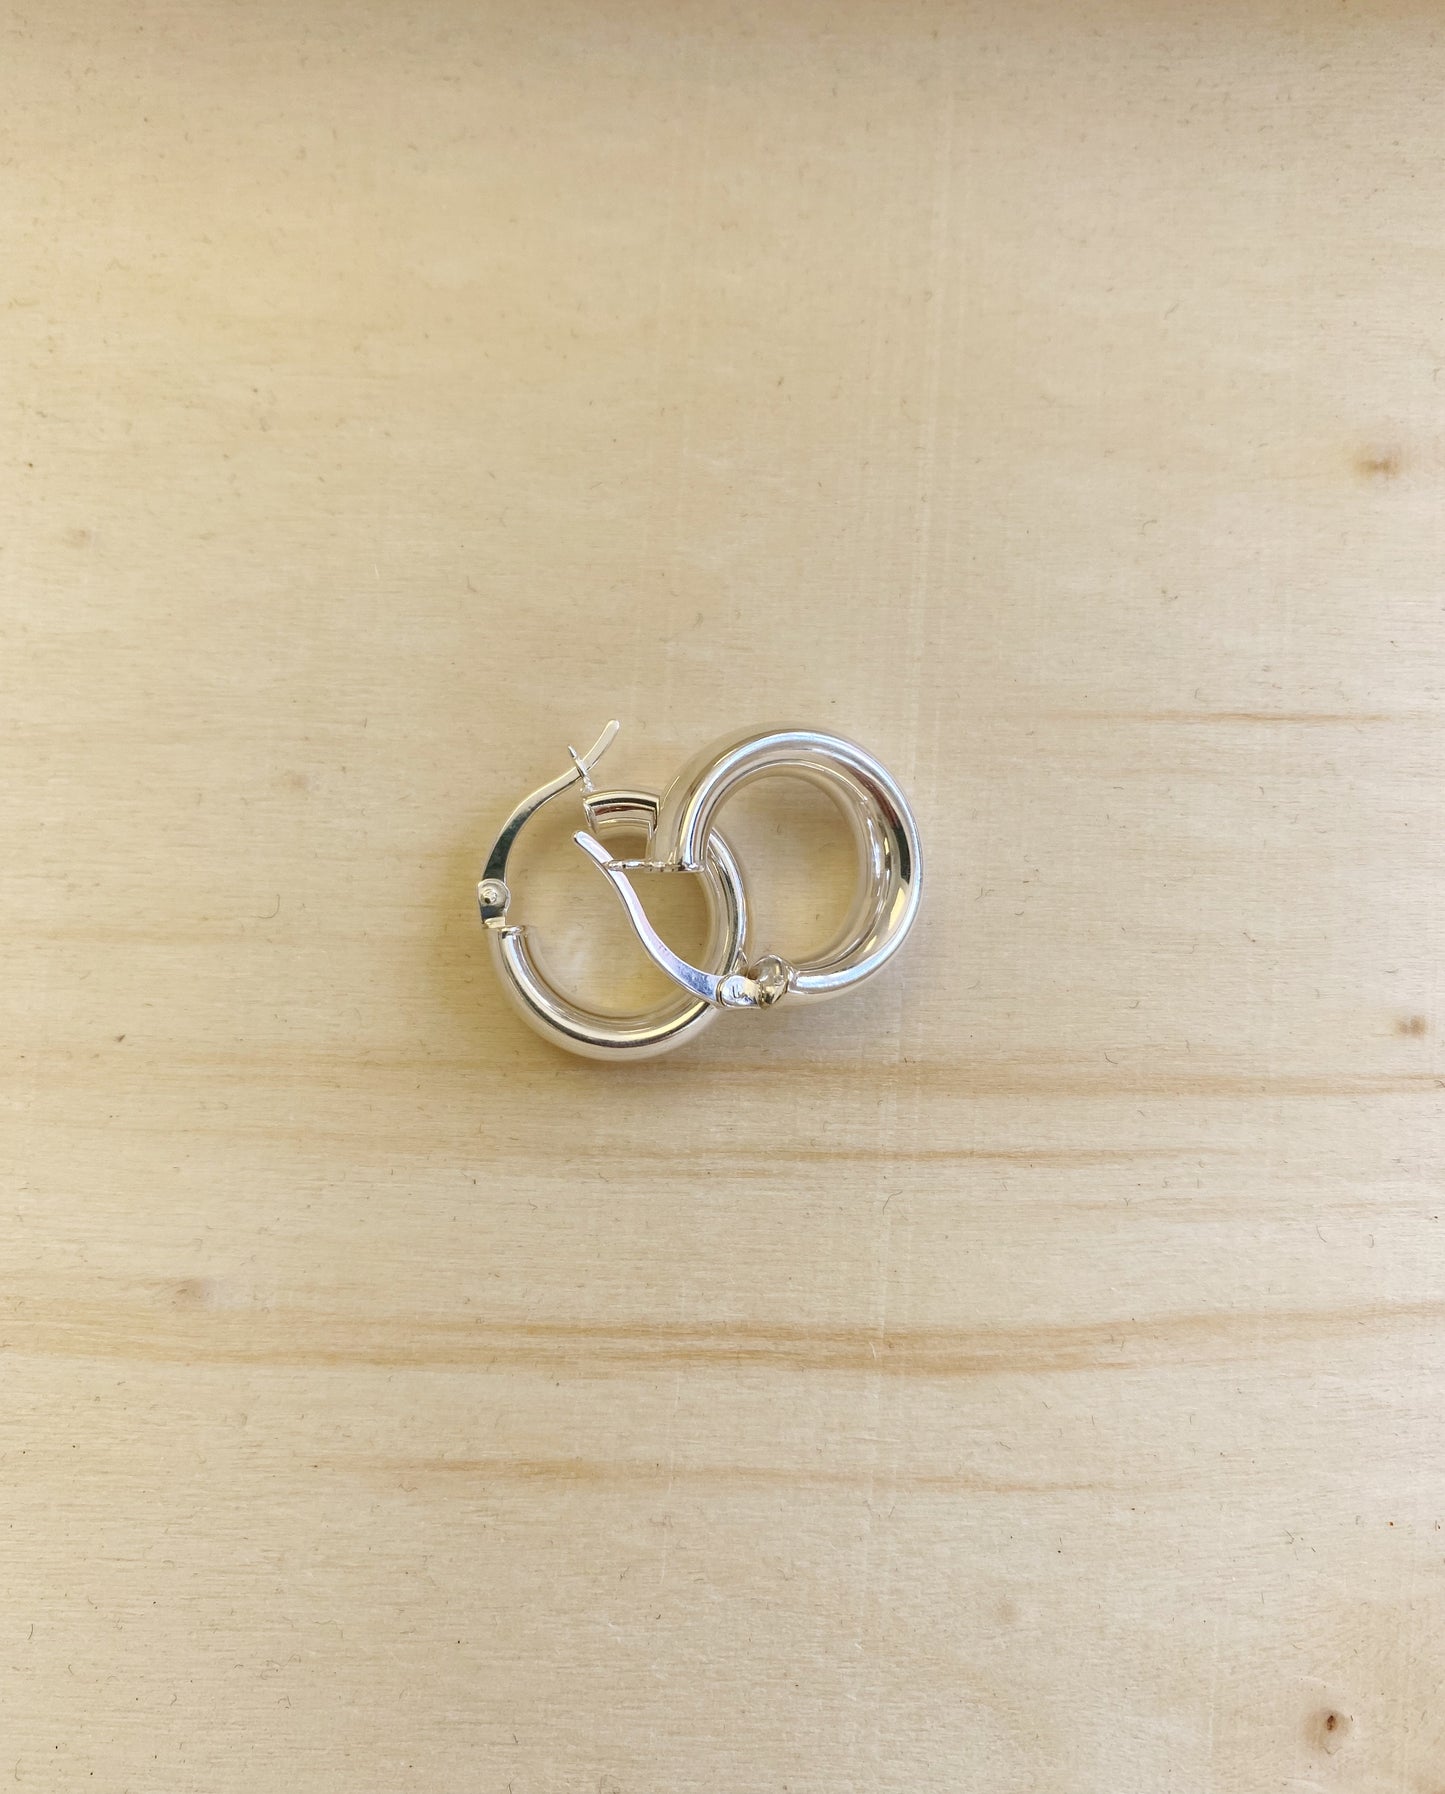 Thick sterling silver hoops